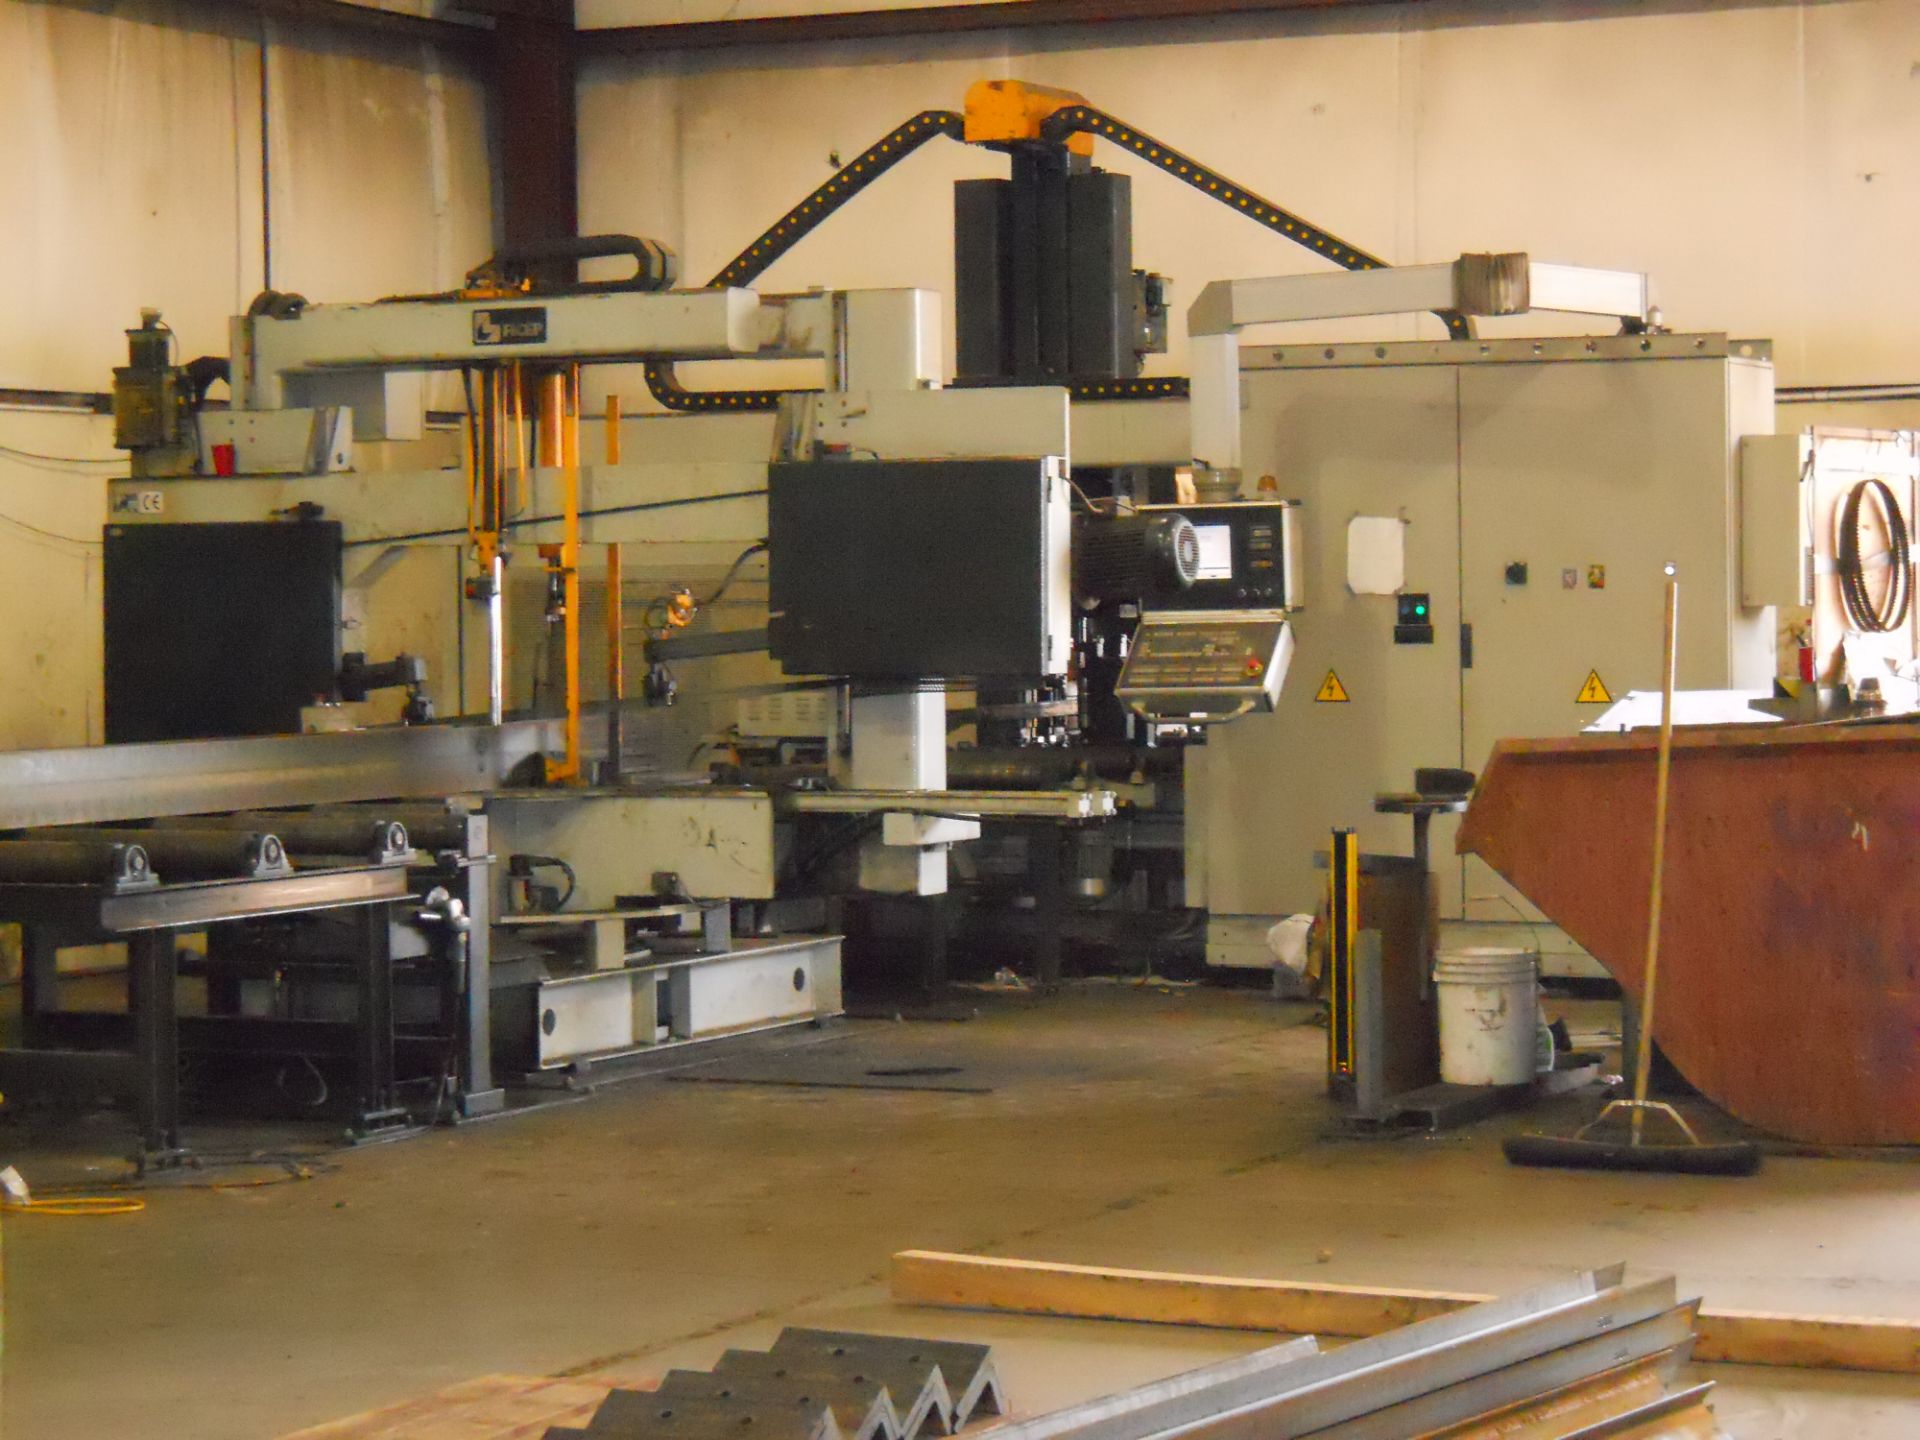 2003 FICEP DRILL/SAW LINE COMBO w/ Approx 60' Infeed & 40' Outfeed Conveyor *DELAYED REMOVAL: END